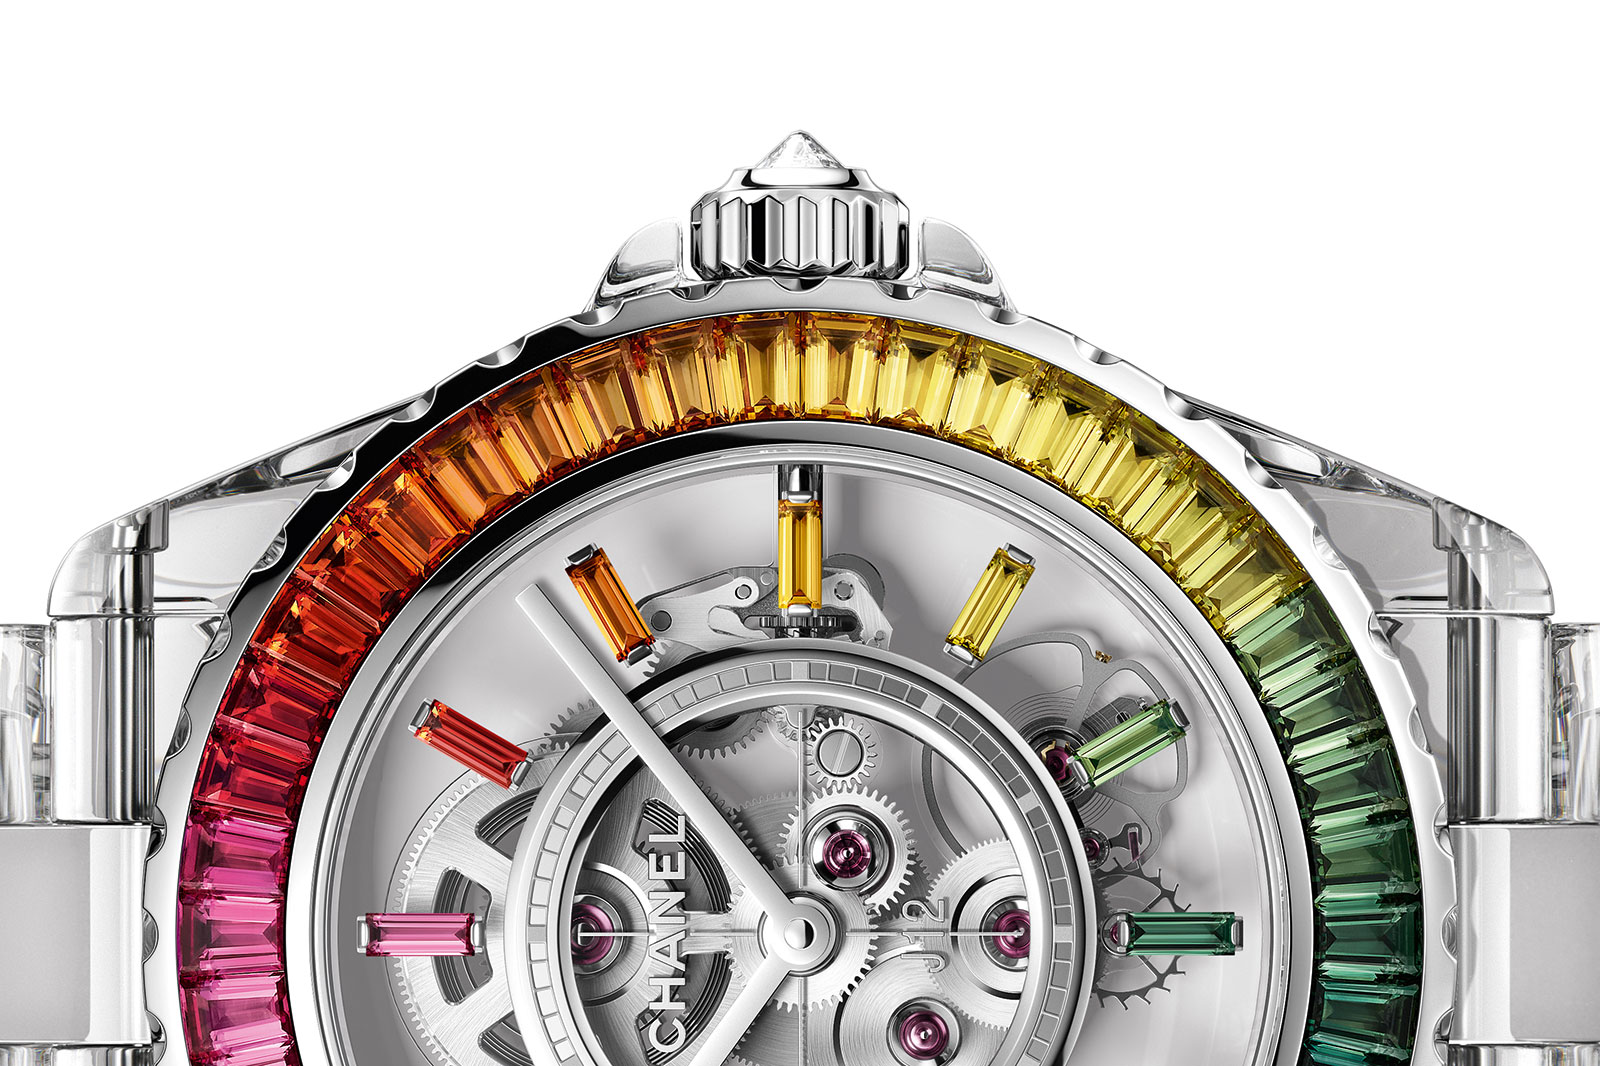 Chanel Introduces the J12 Electro “Rainbow”